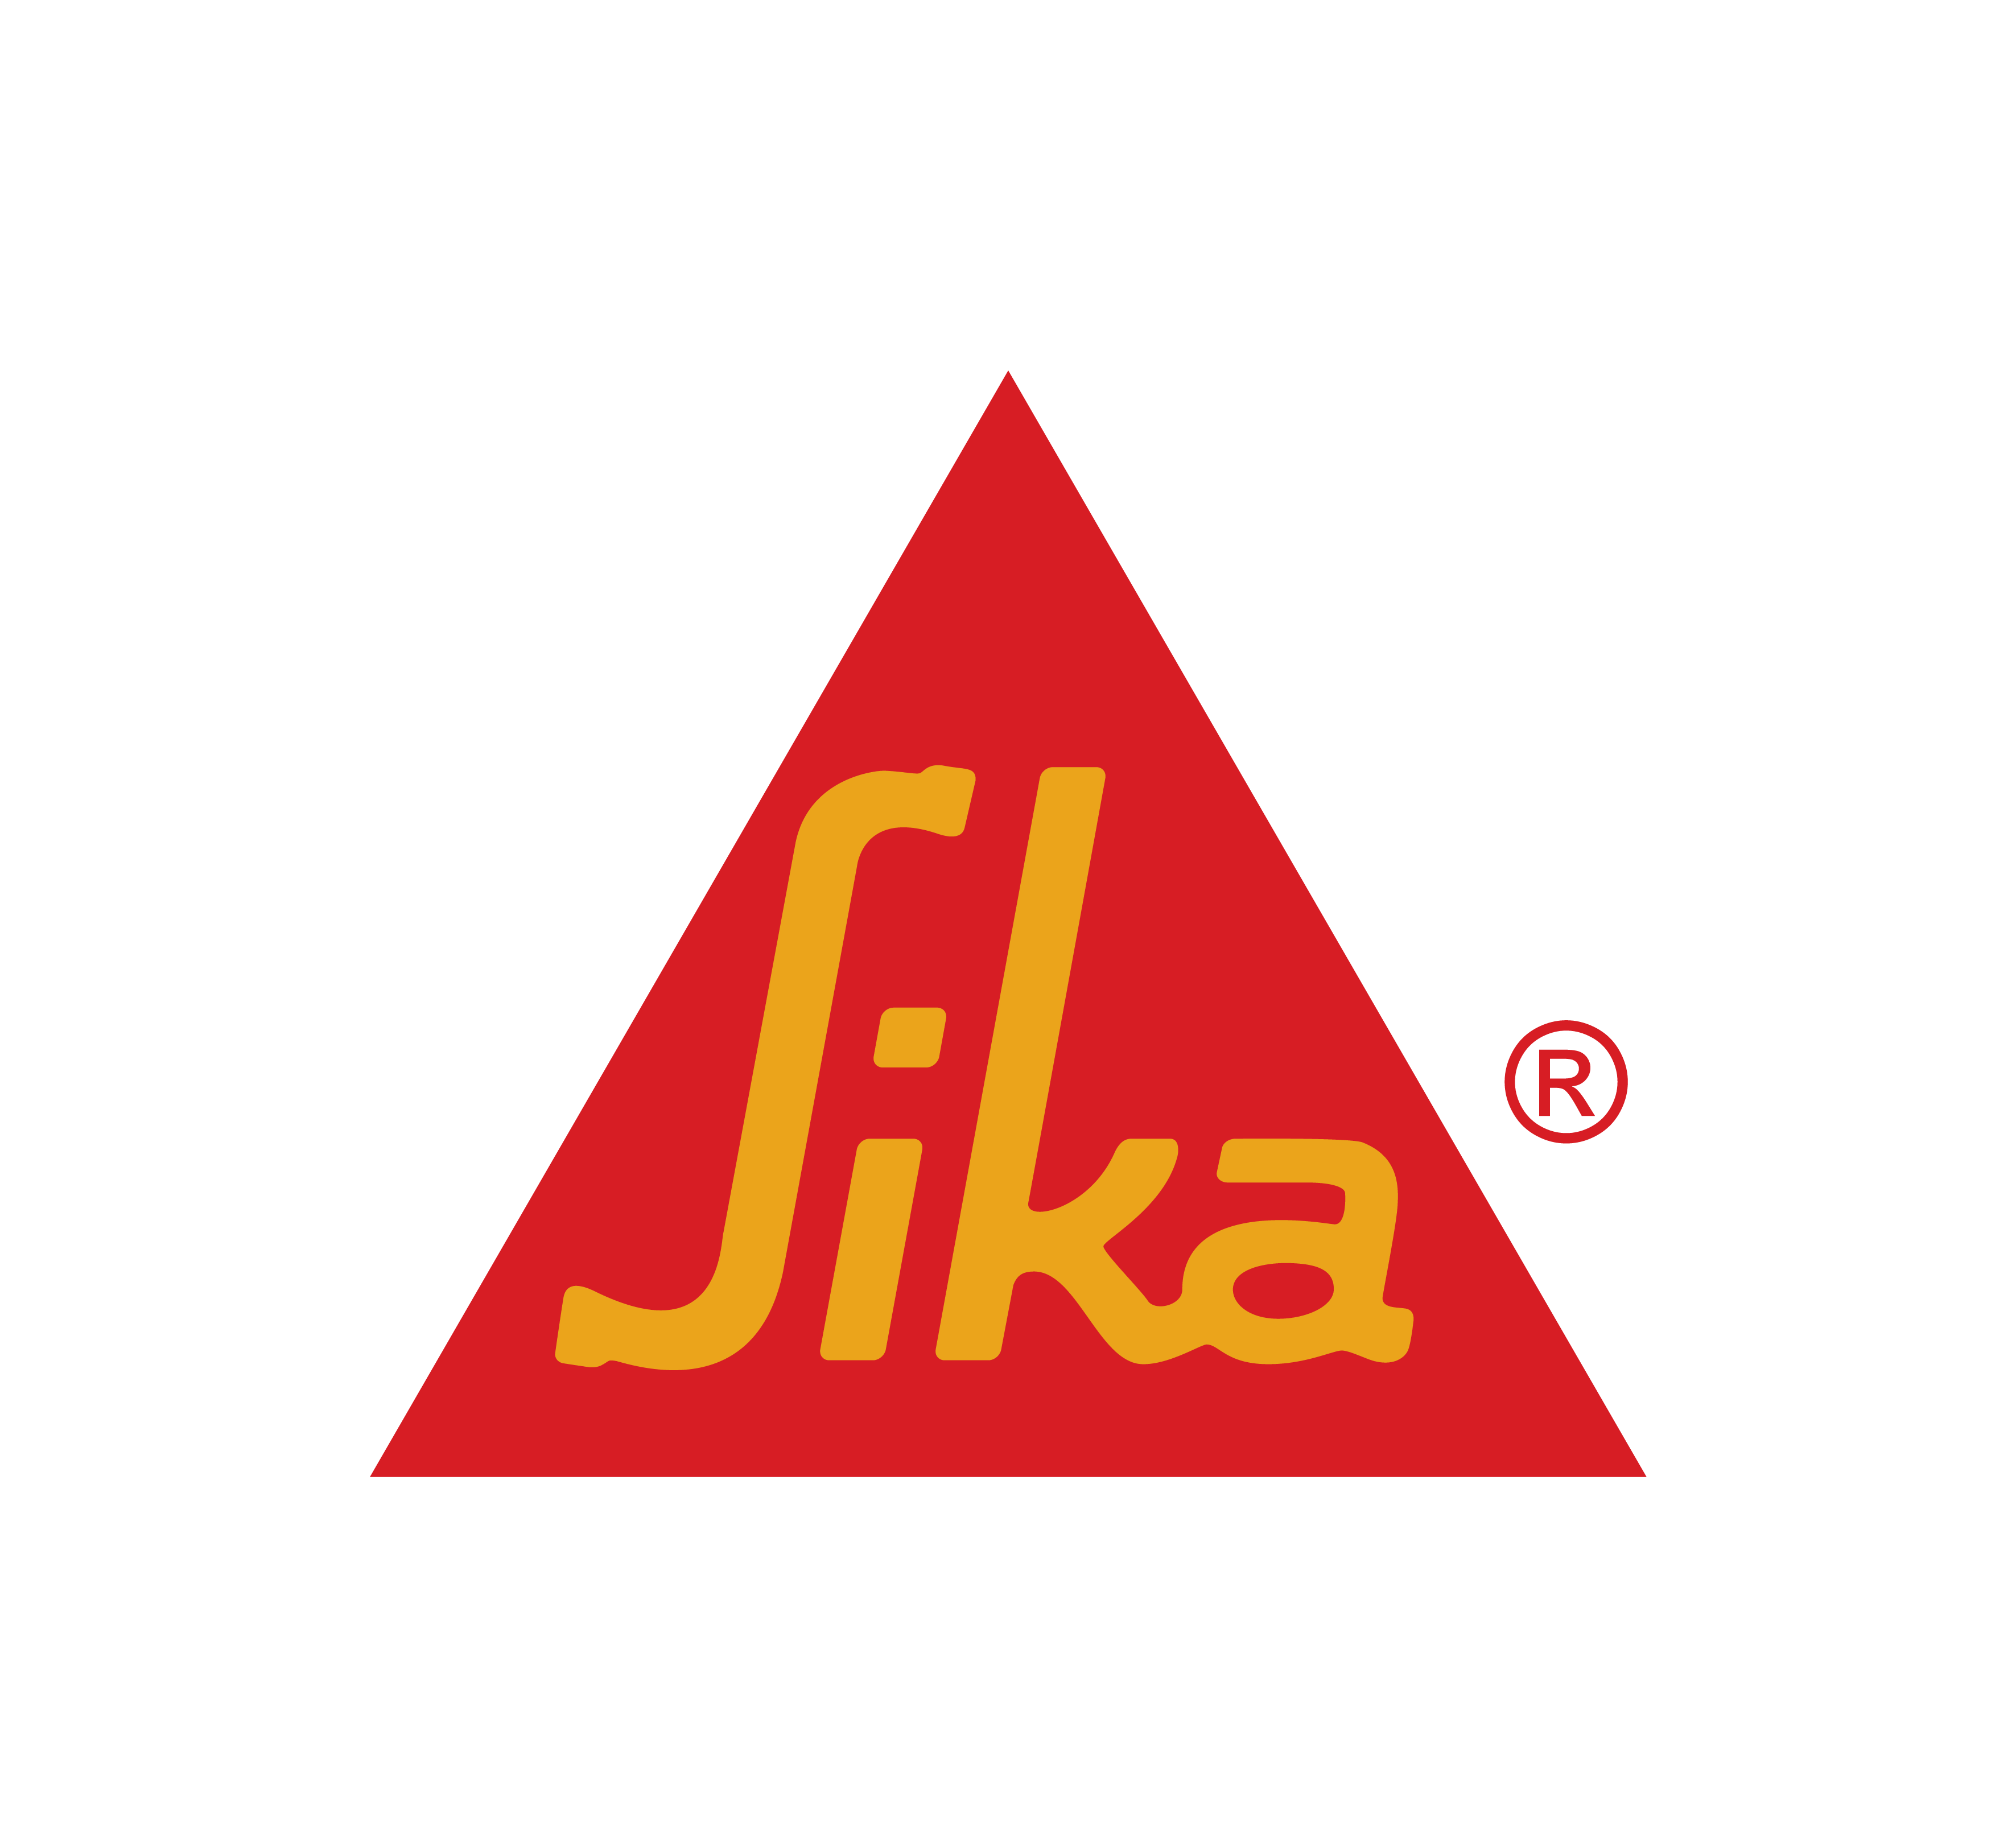 kisspng-sika-ag-construction-sika-switzerland-ag-industry-5b602c8bcfc001.426404581533029515851 (2)